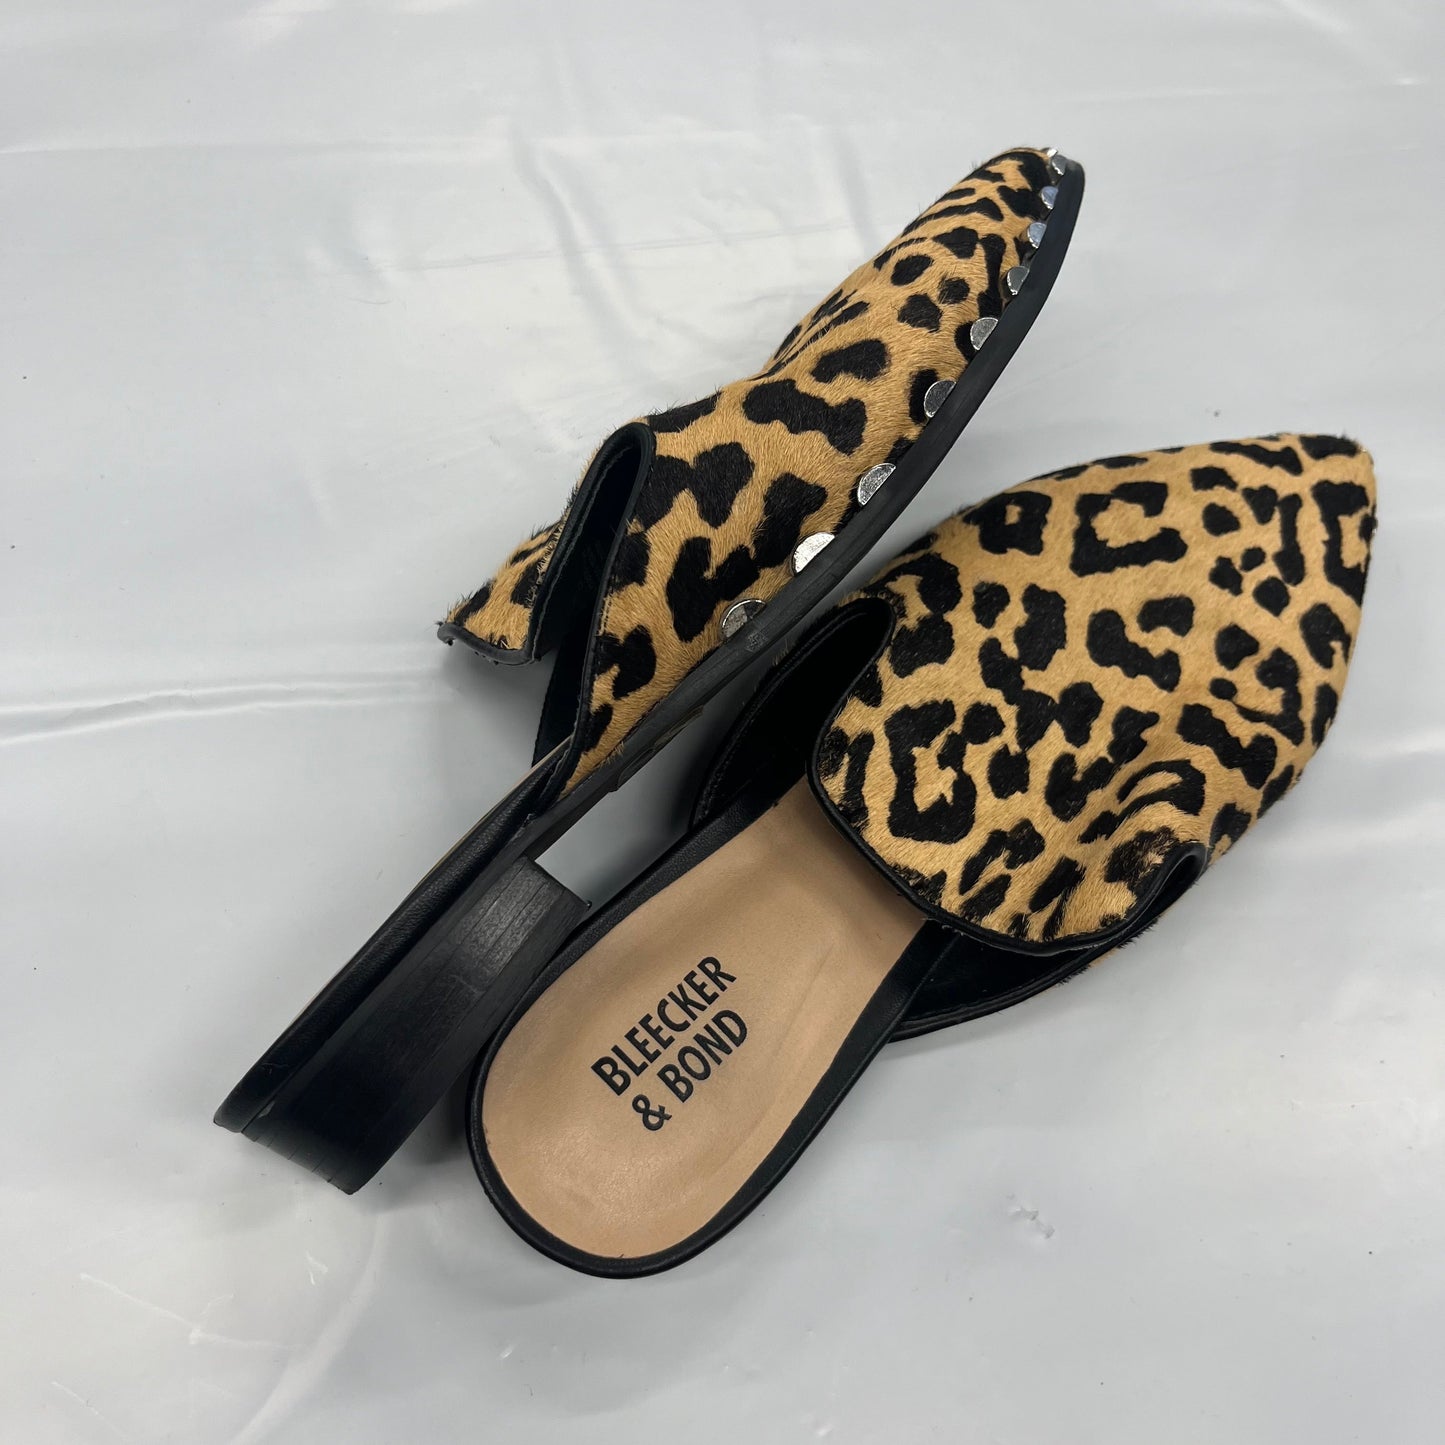 Animal Print Shoes Flats Espadrille Blecker And Bond, Size 7.5